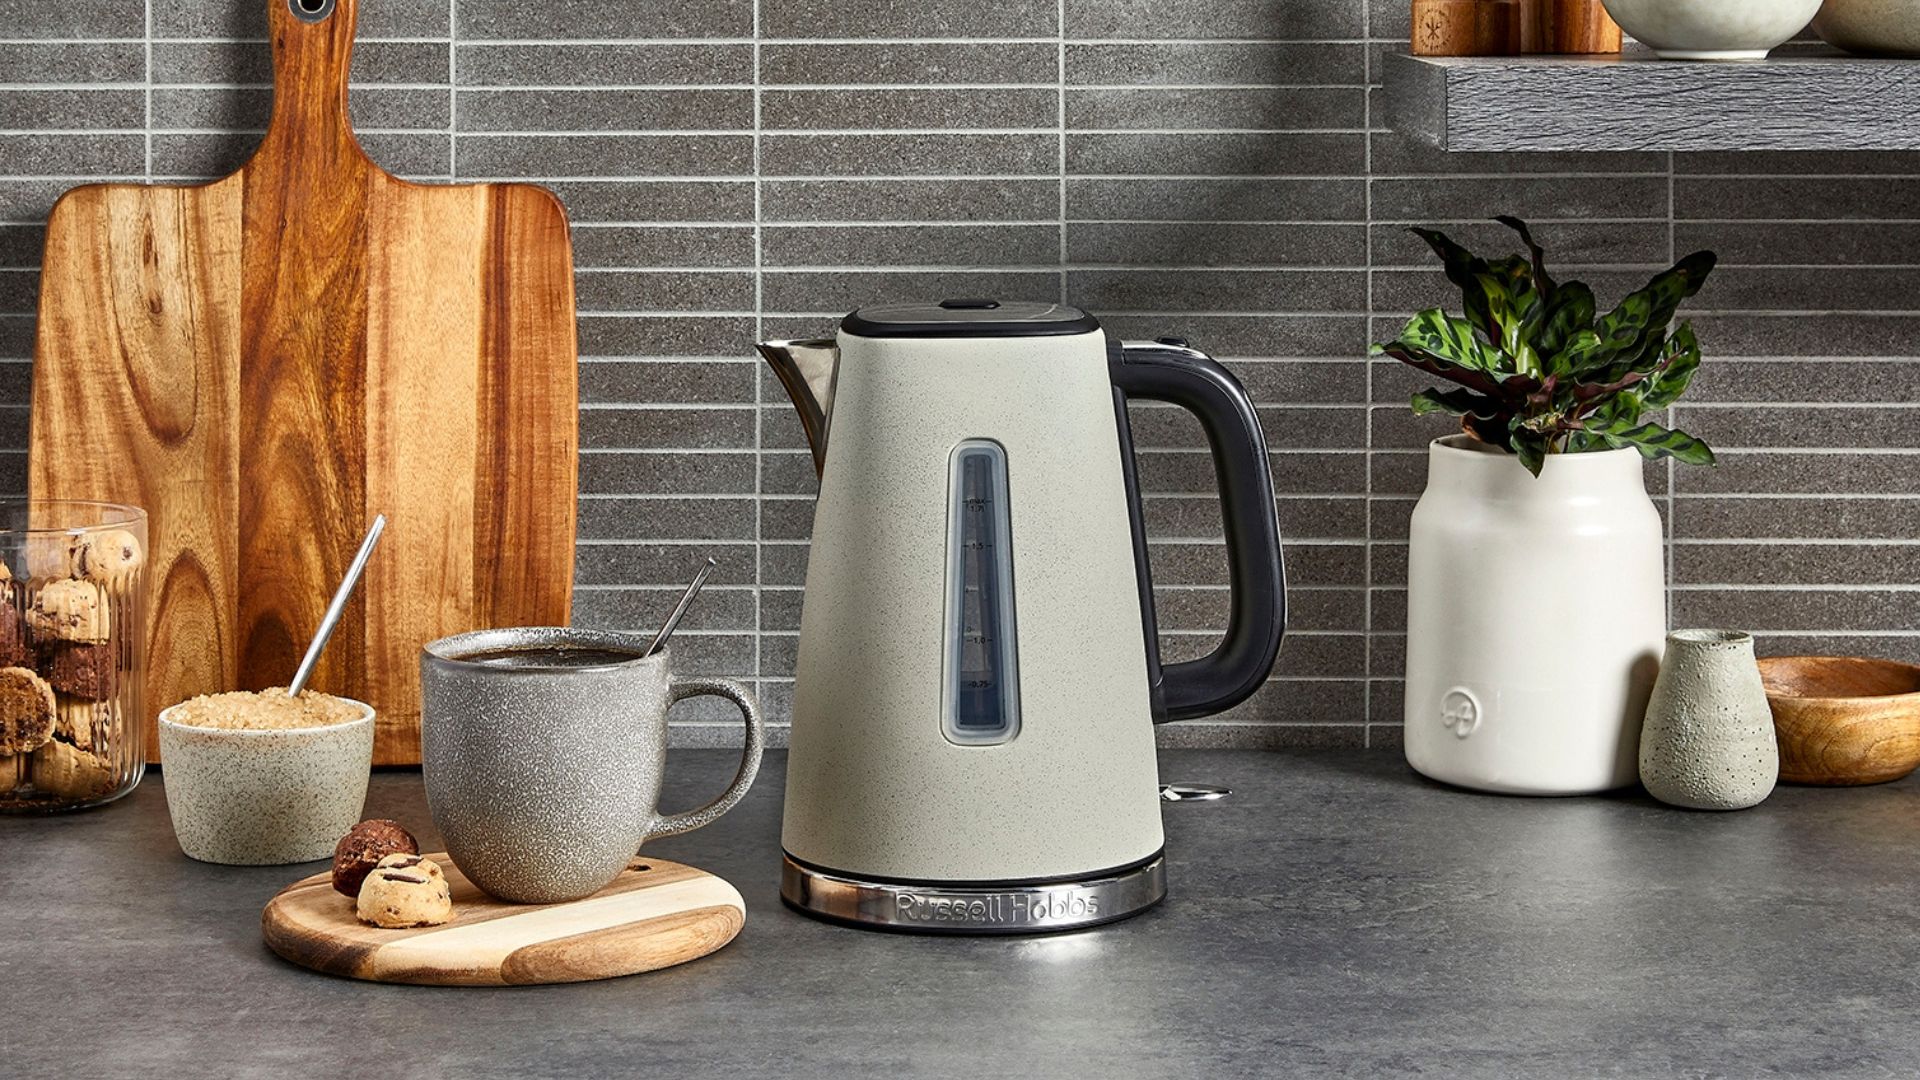 Preparing Tea With A Stone Grey Electric Kettle